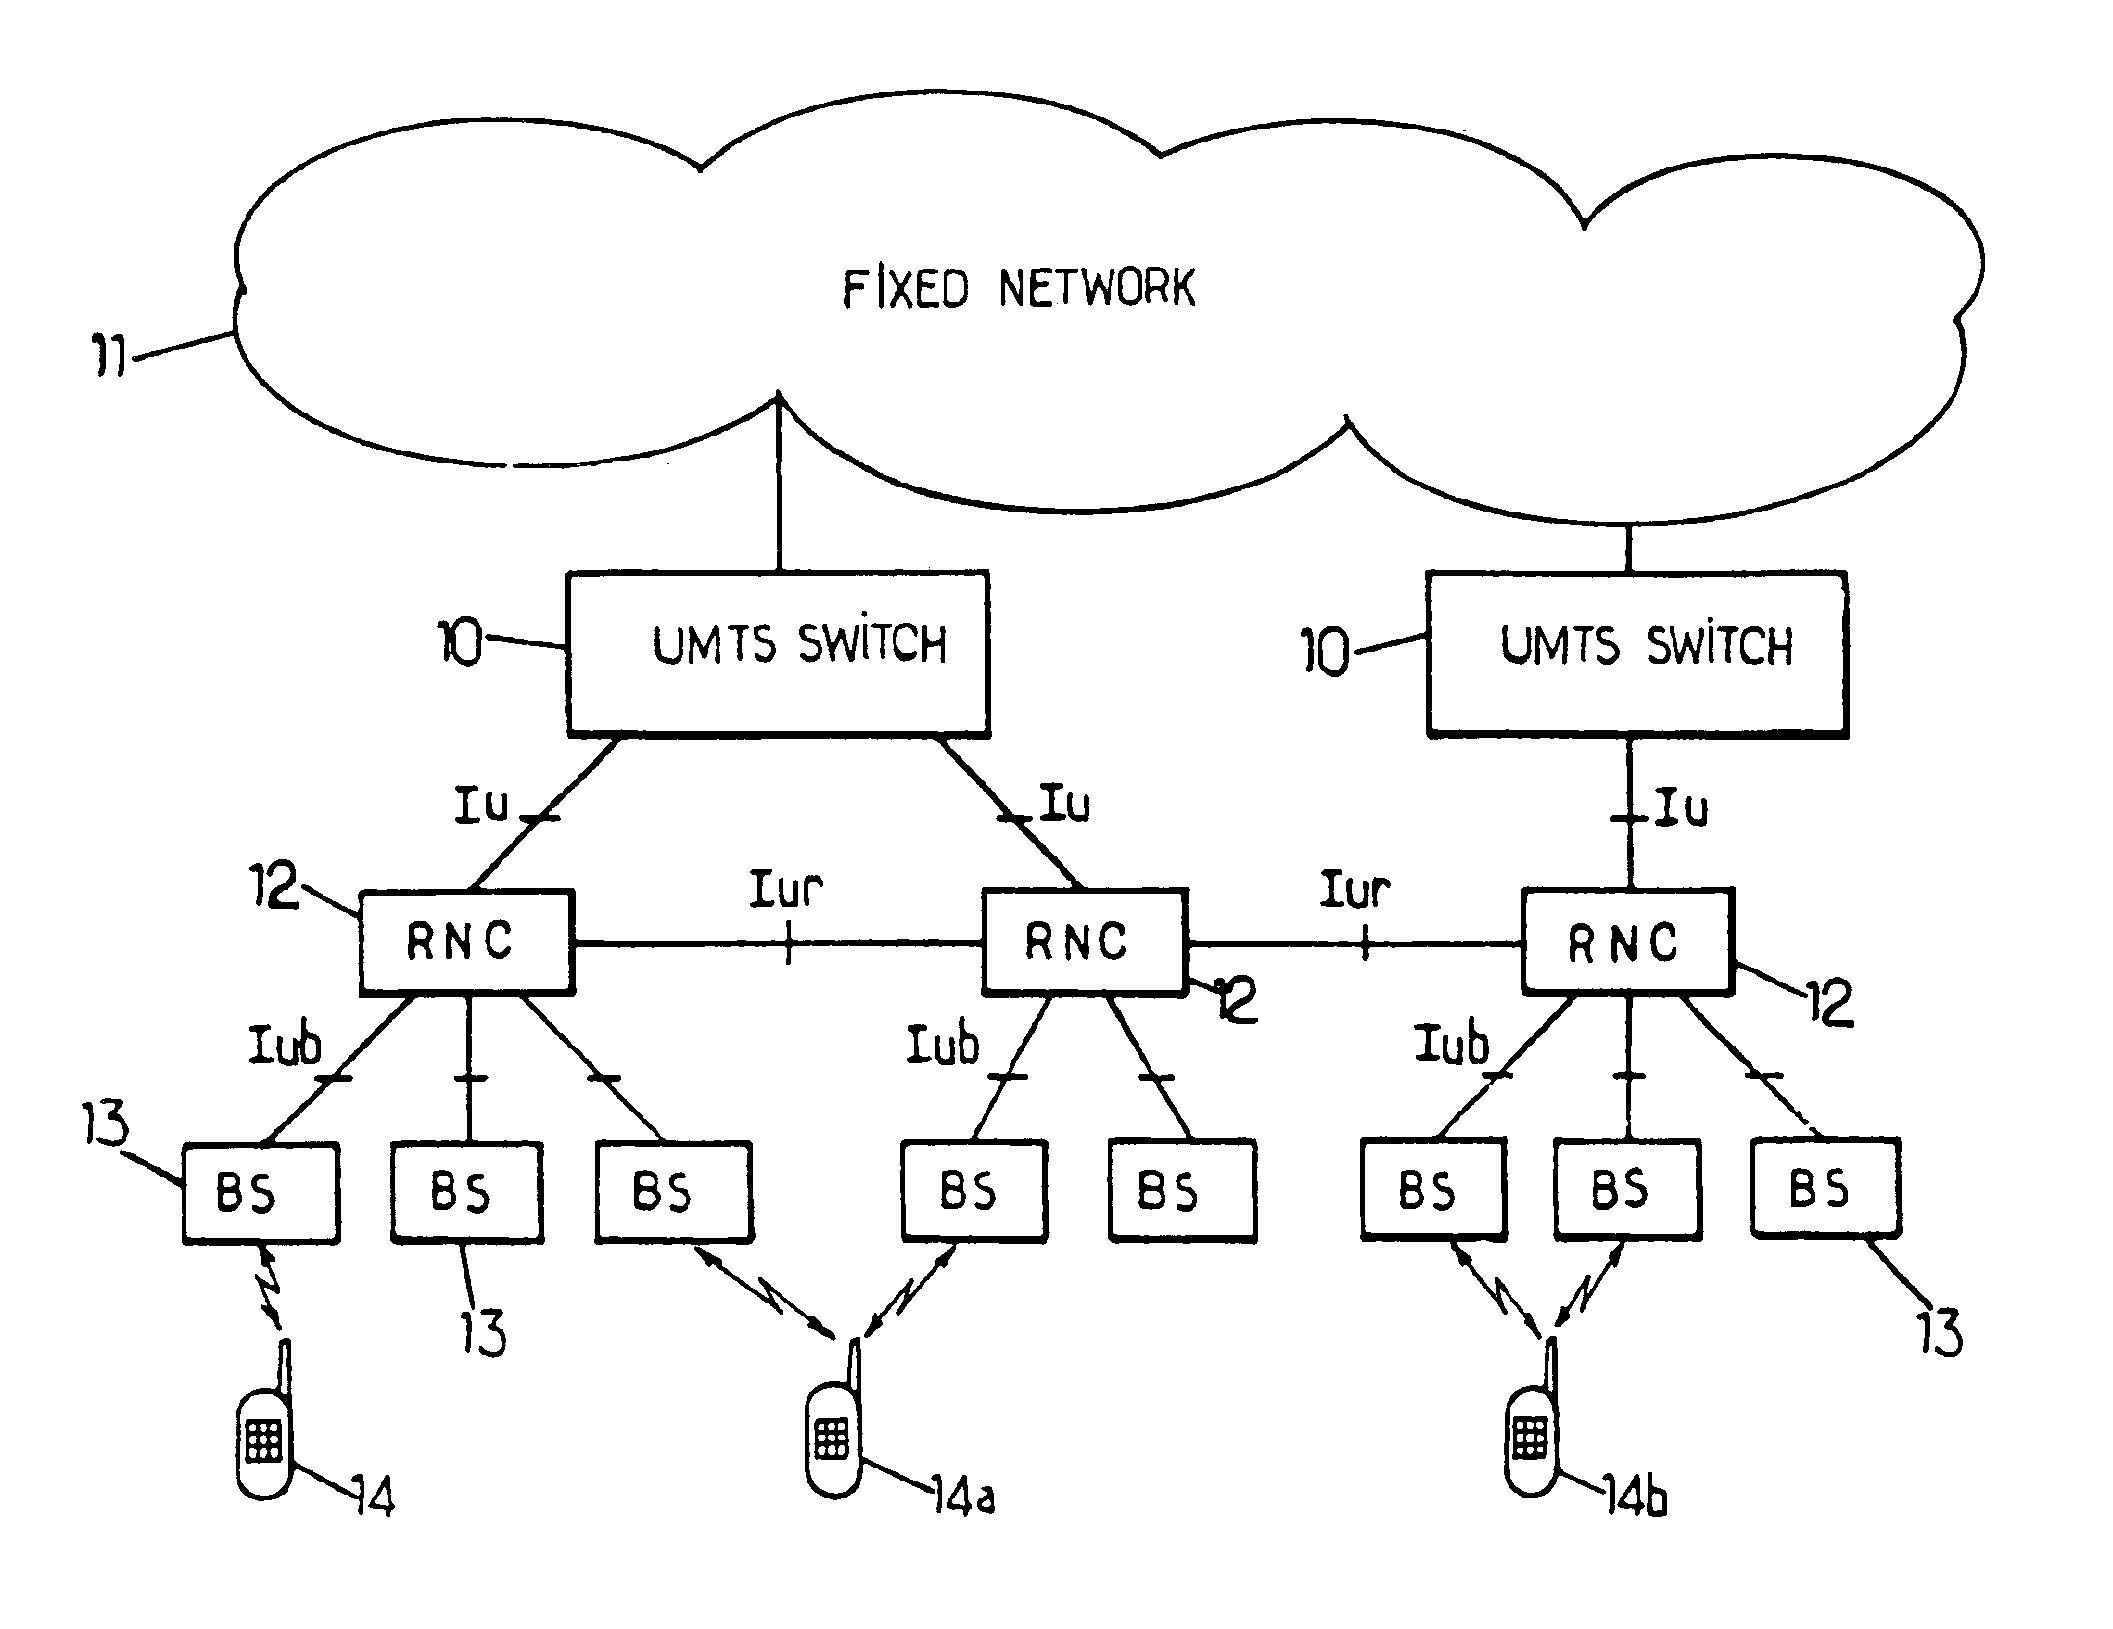 Method of controlling a channel between a radio terminal and a cellular radiocommunication infrastructure, and access network implementing such a method